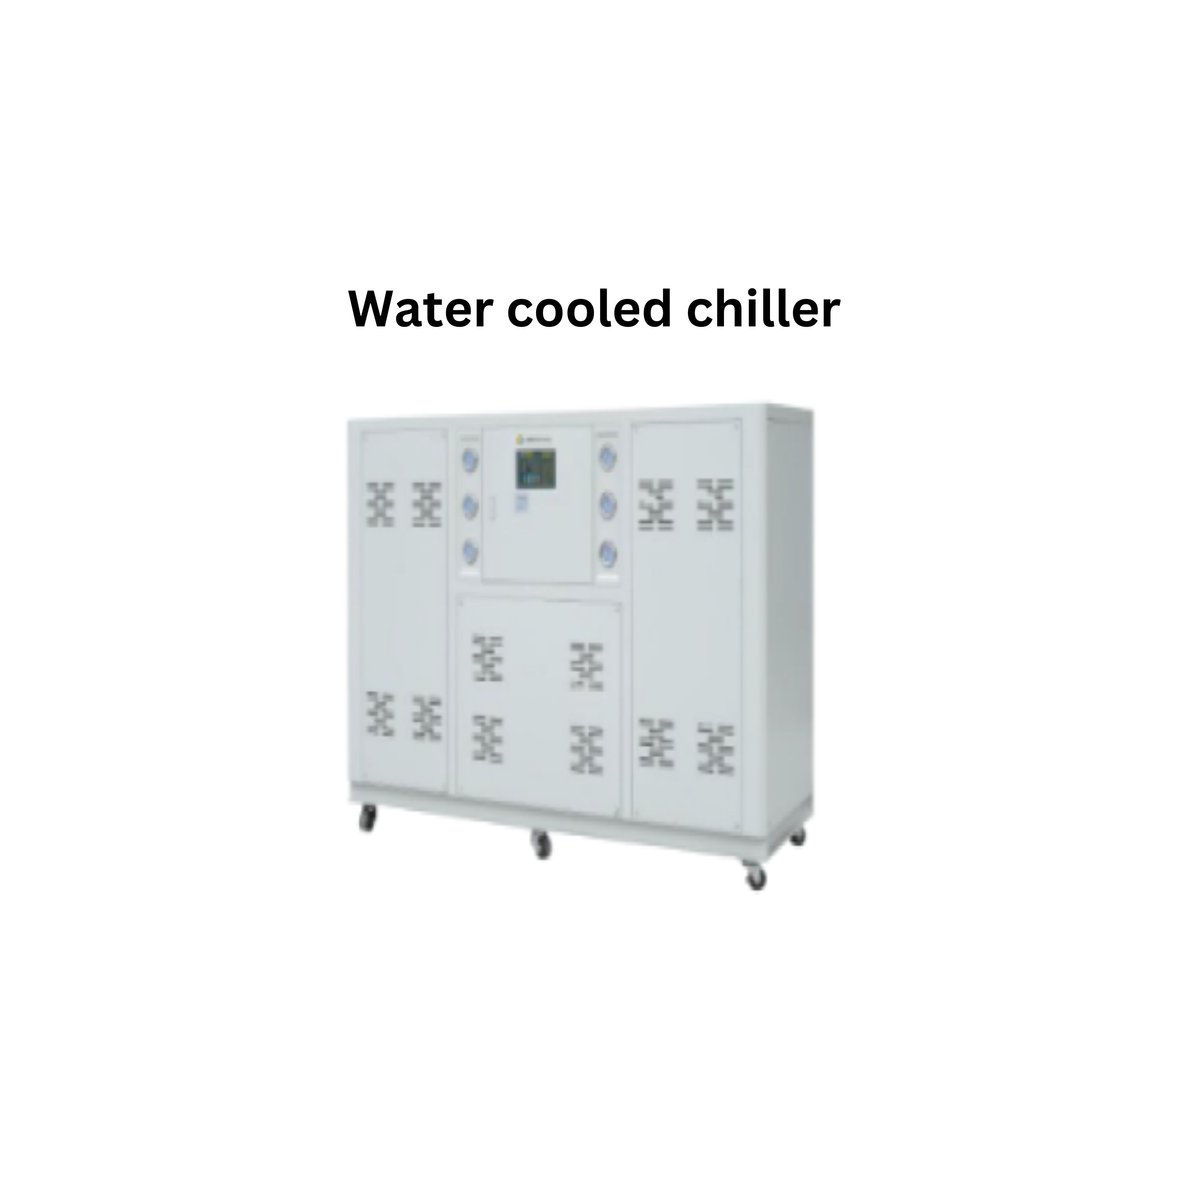 Water cooled chiller .jpg